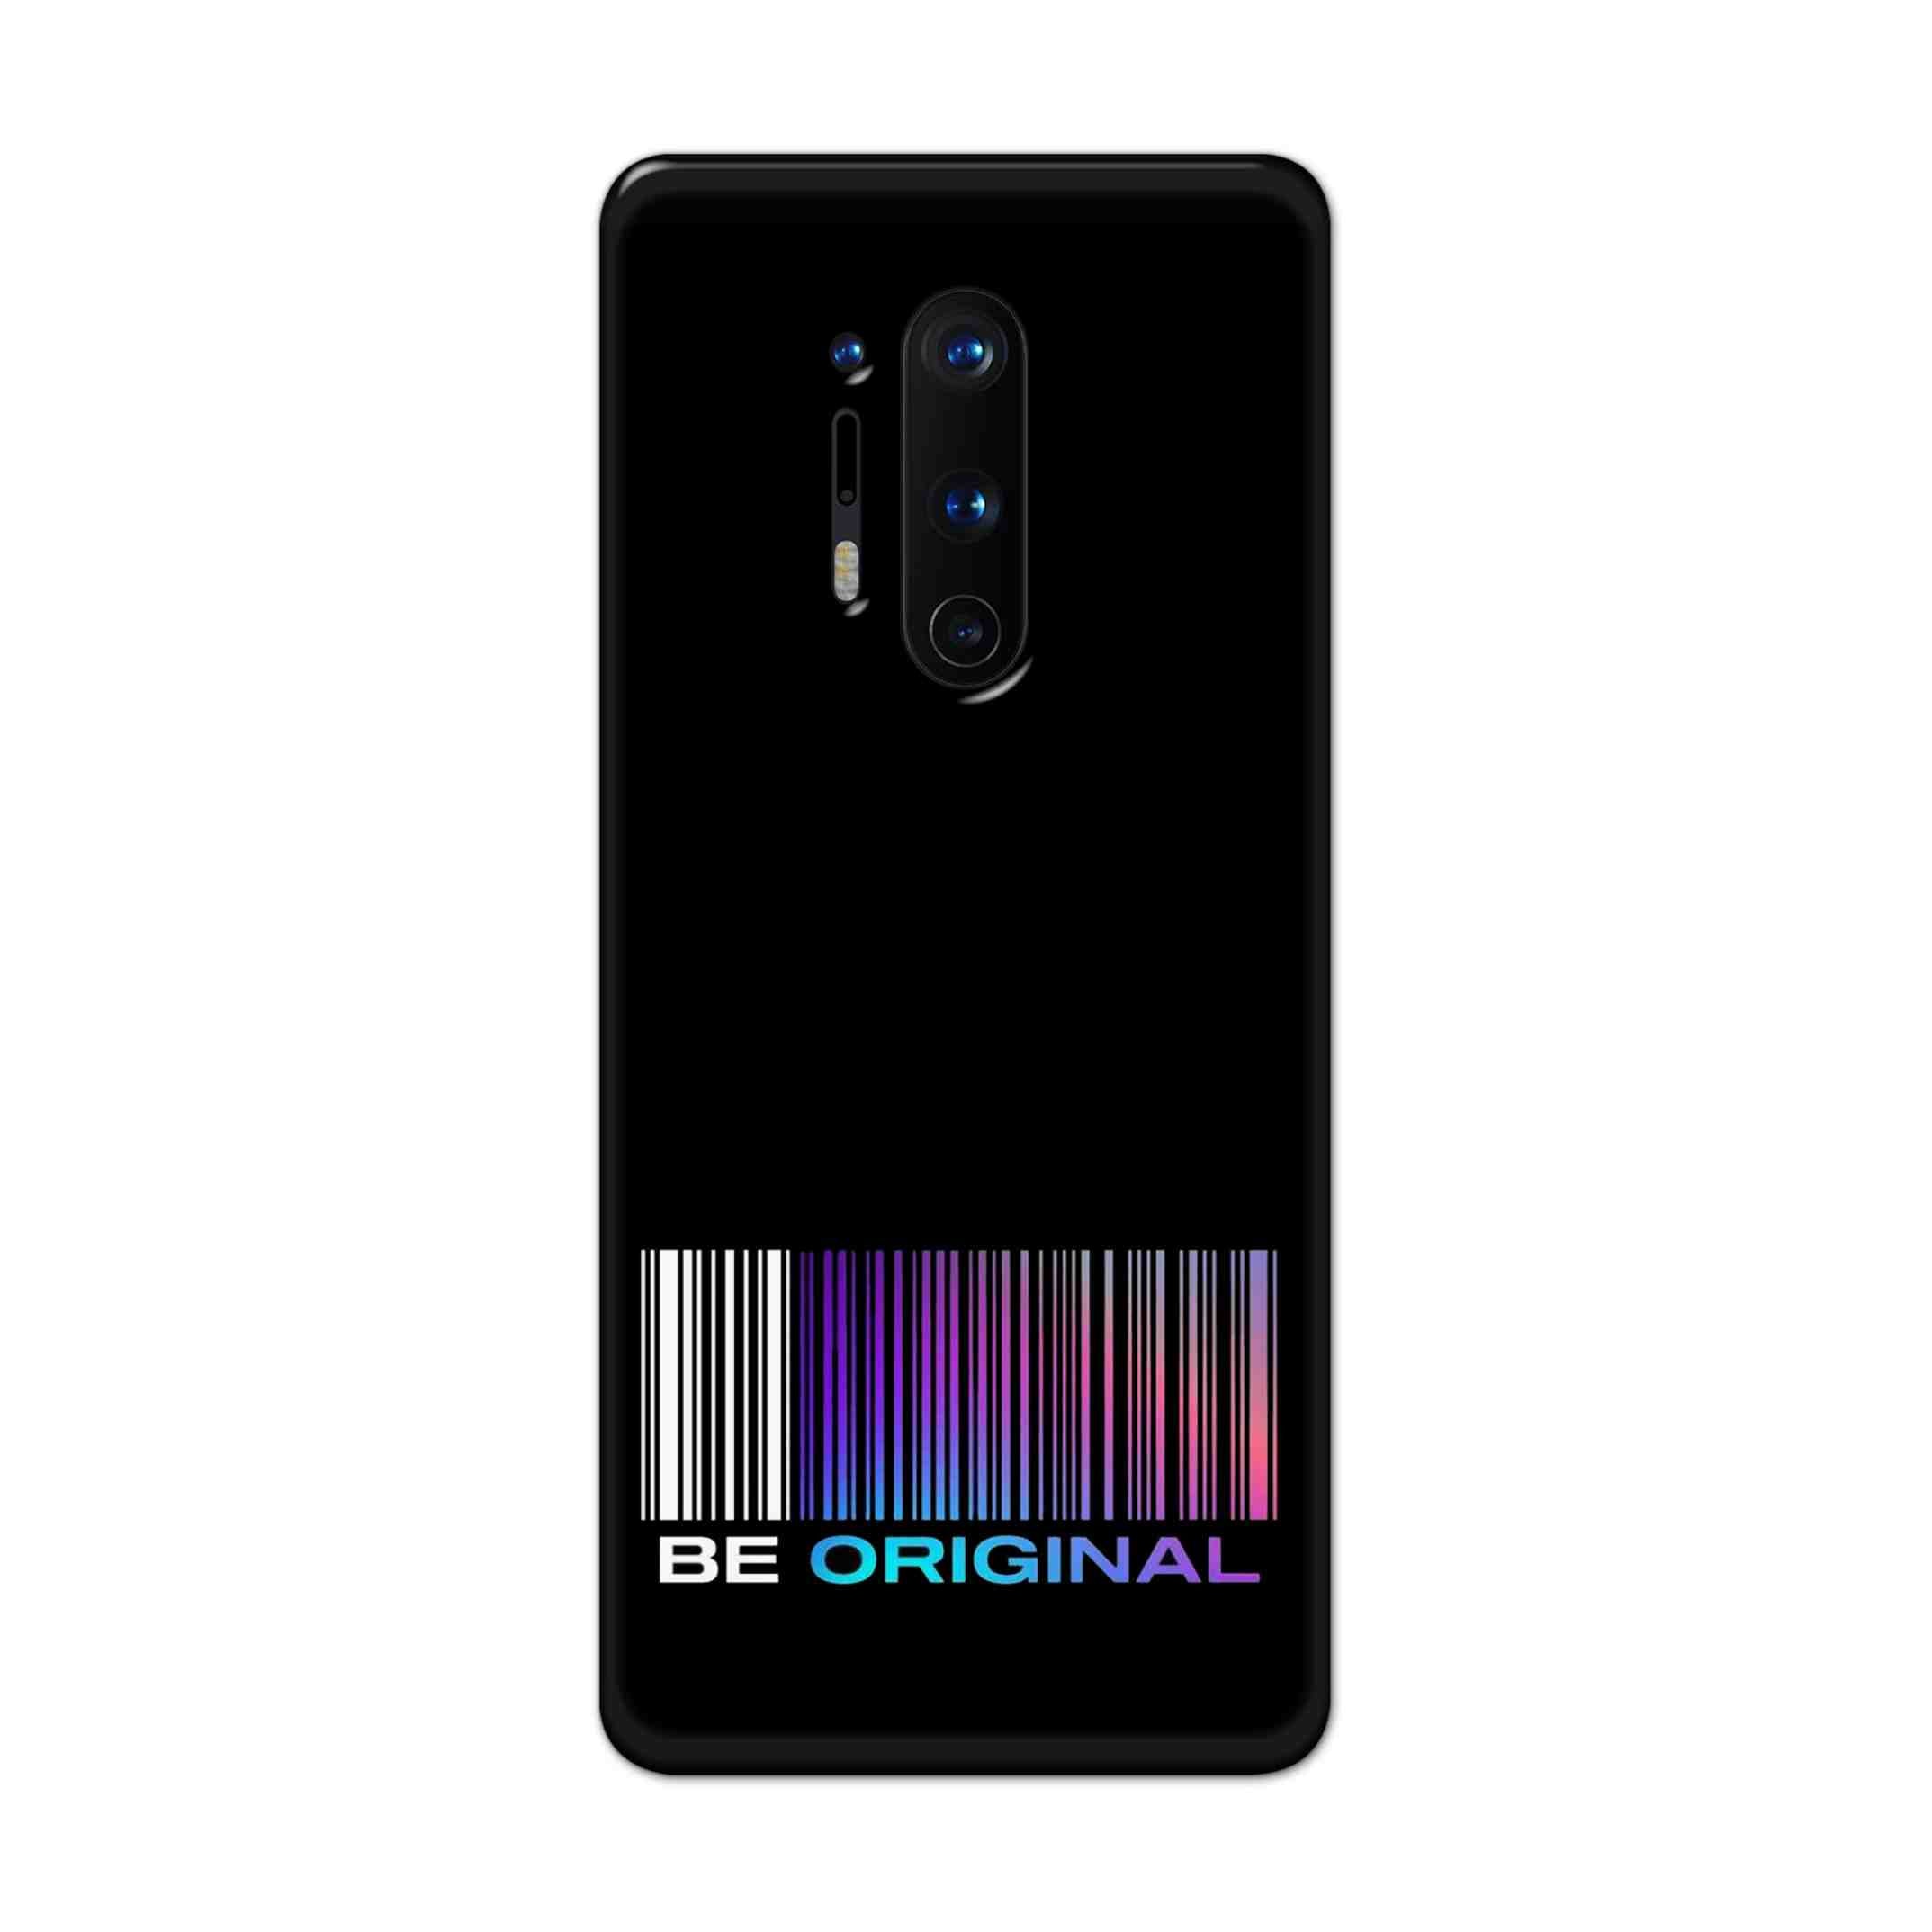 Buy Be Original Hard Back Mobile Phone Case Cover For OnePlus 8 Pro Online